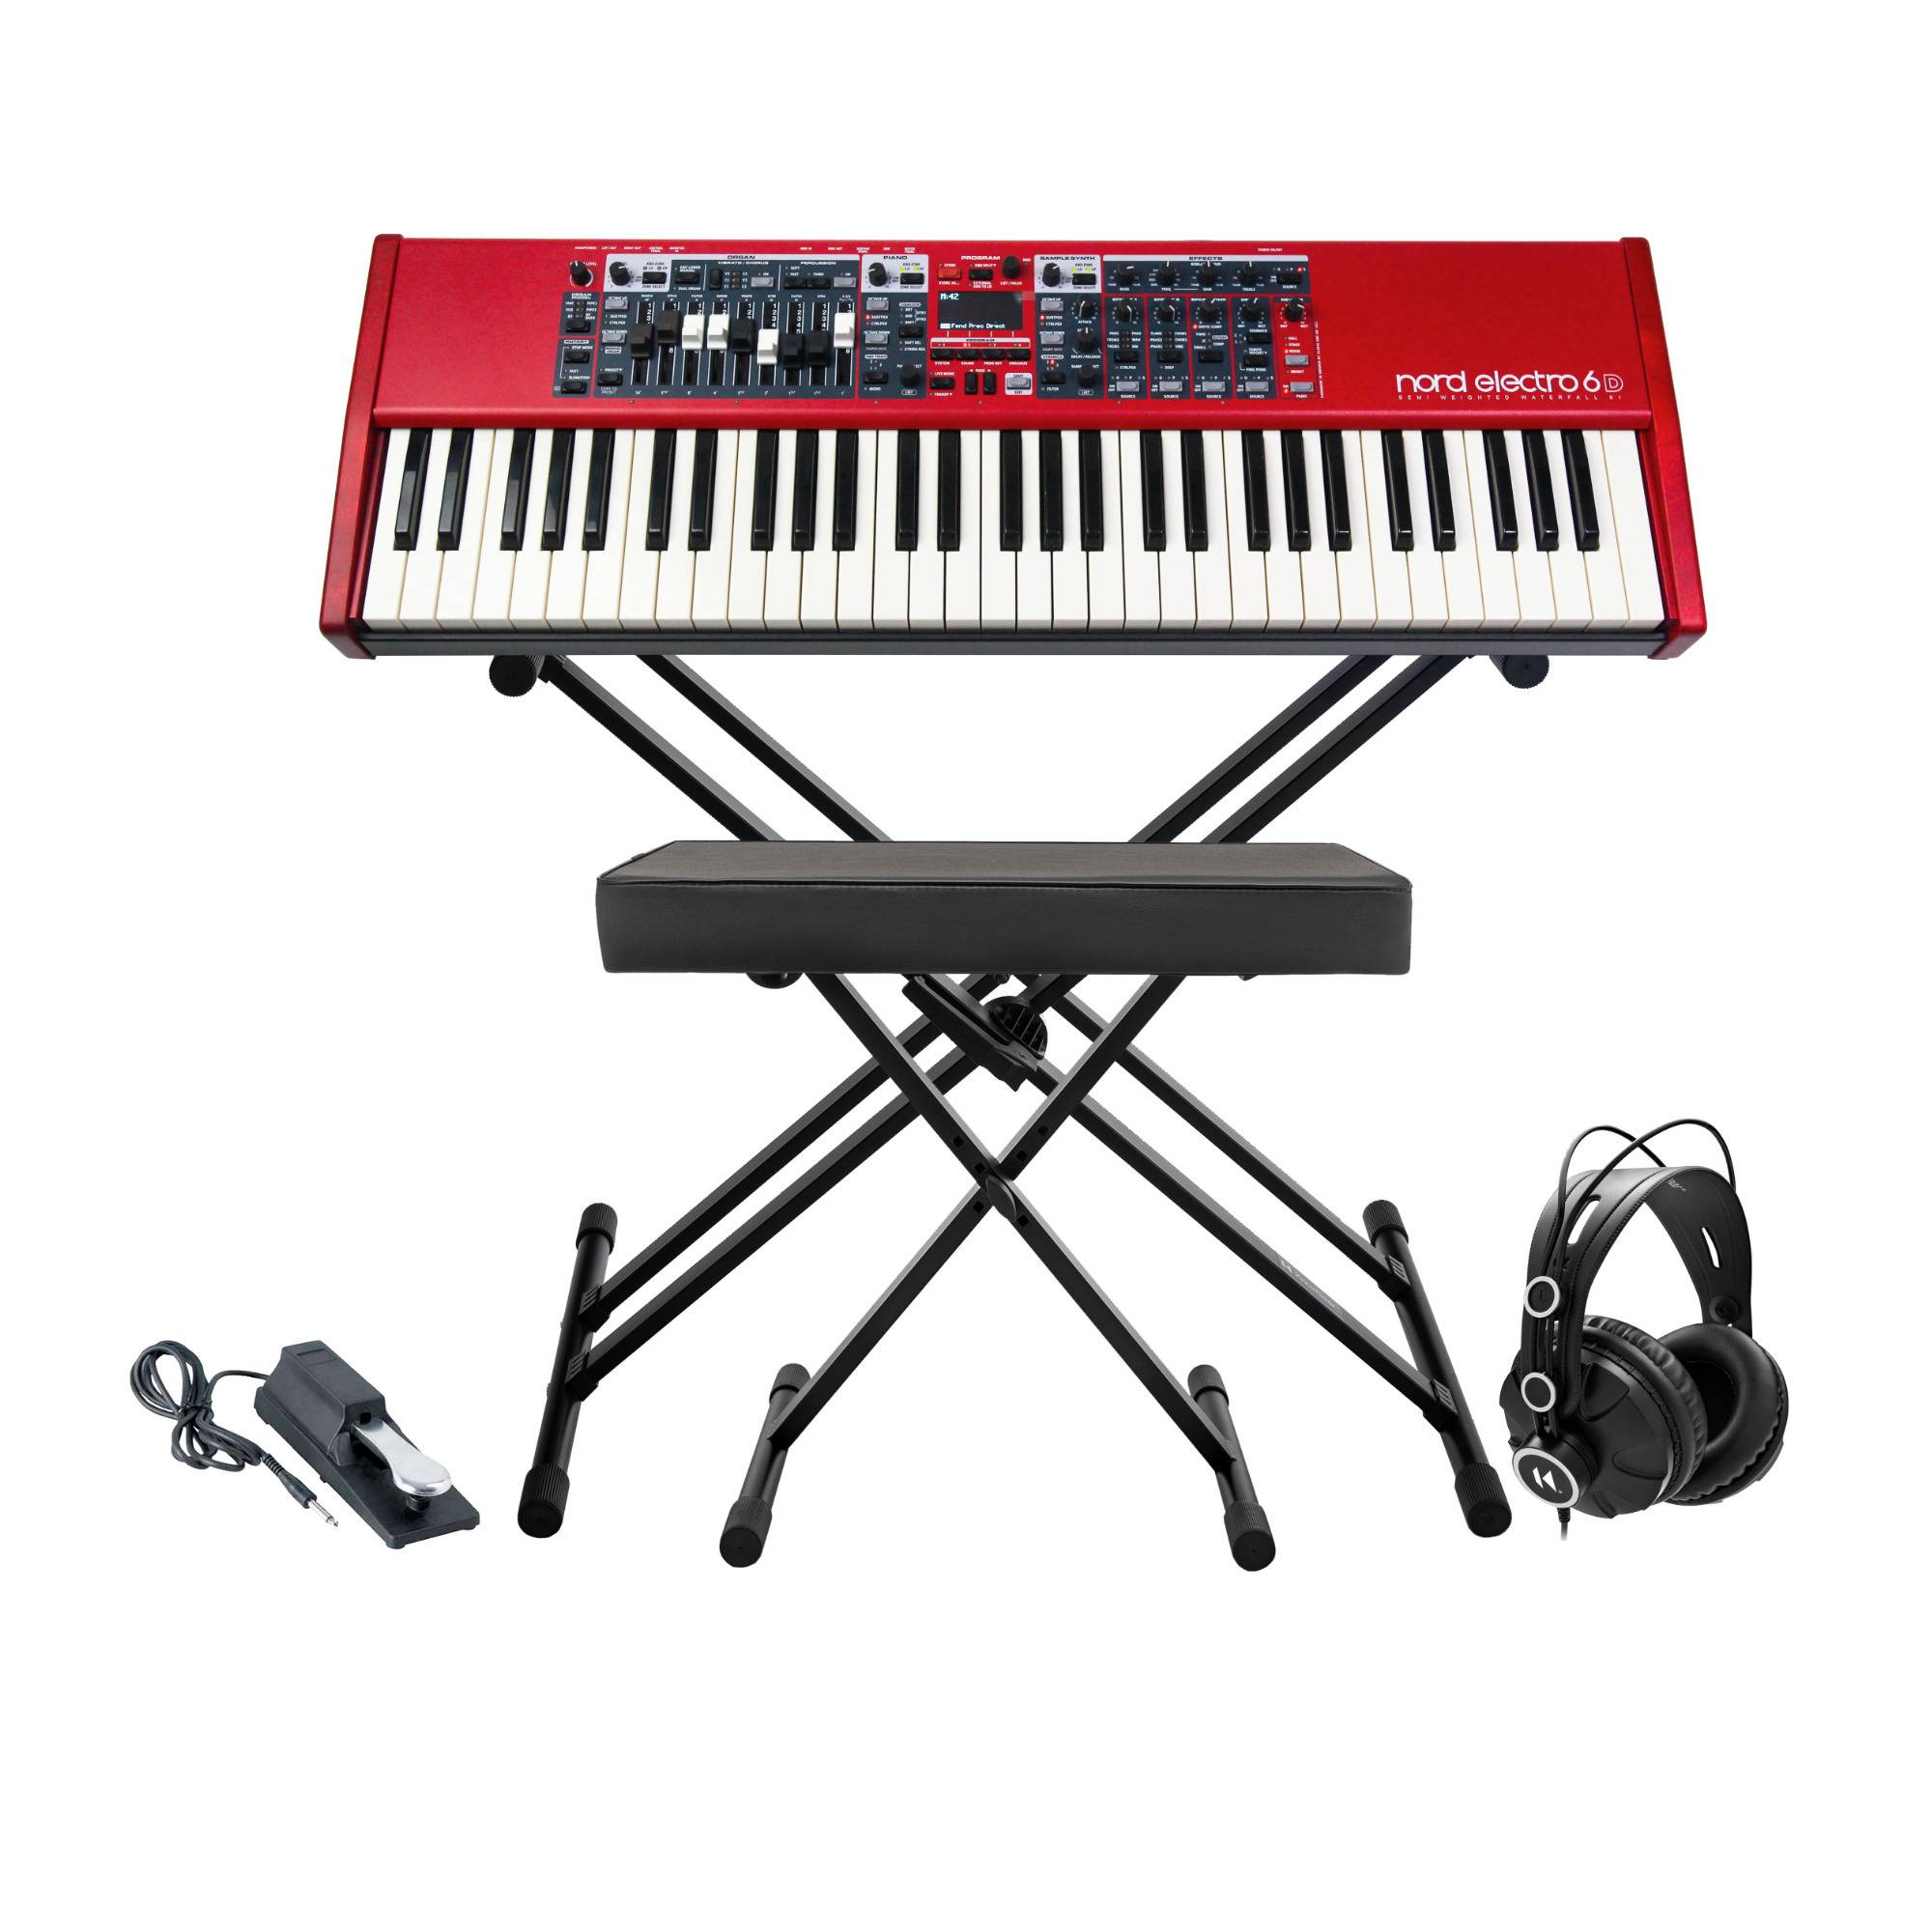 Nord Electro 6D 61 Key Keyboard with Stand, Bench, Sustain Pedal and Heaphones